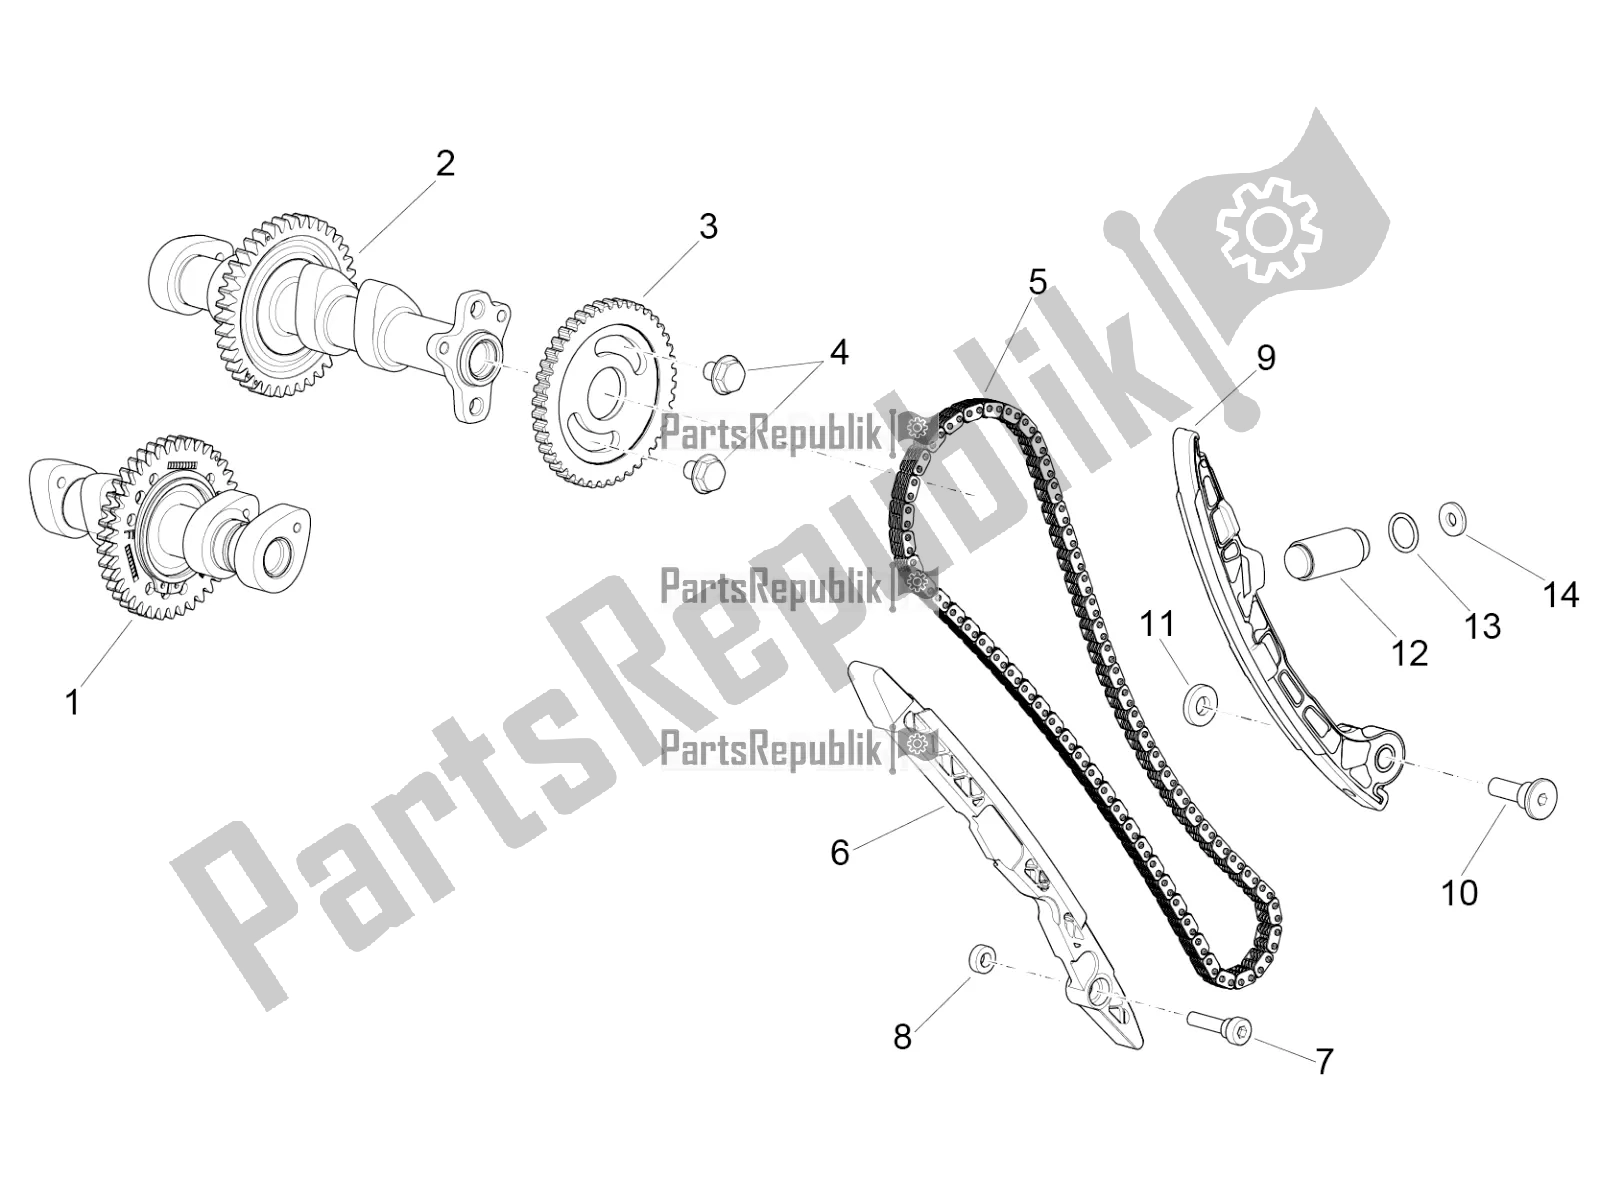 All parts for the Front Cylinder Timing System of the Aprilia RSV4 1100 Factory ABS Apac 2022